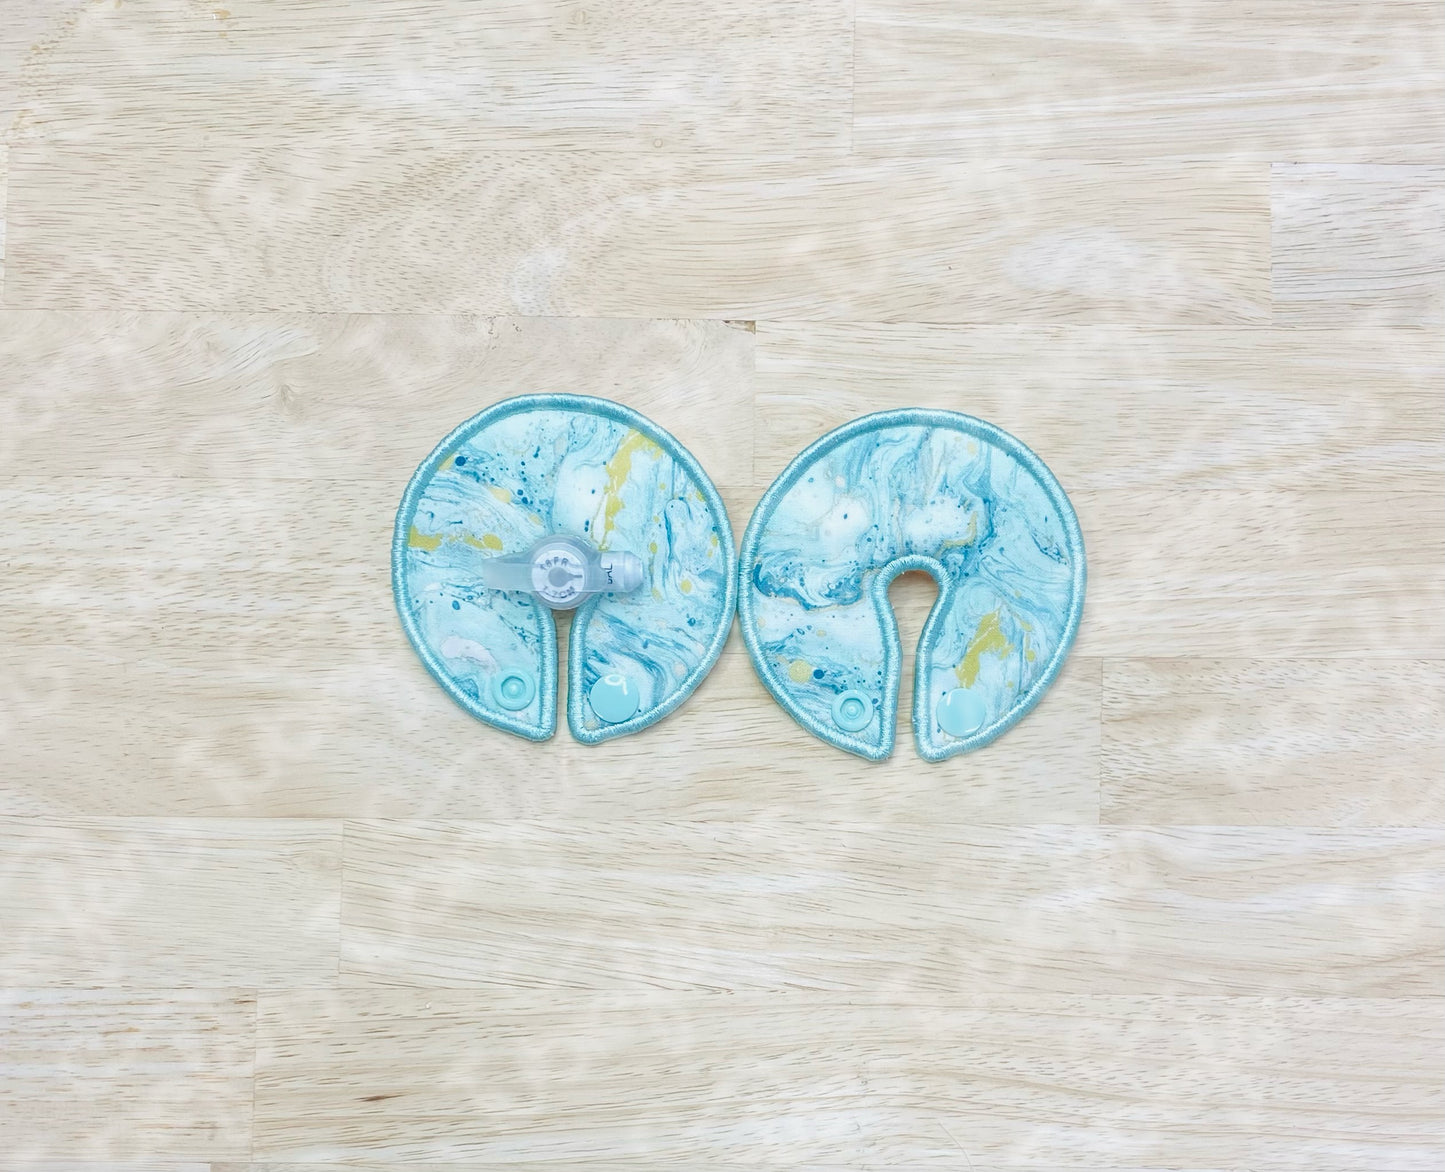 G-Tube Button Pad Cover Large - Gold, White and Teal Swirl